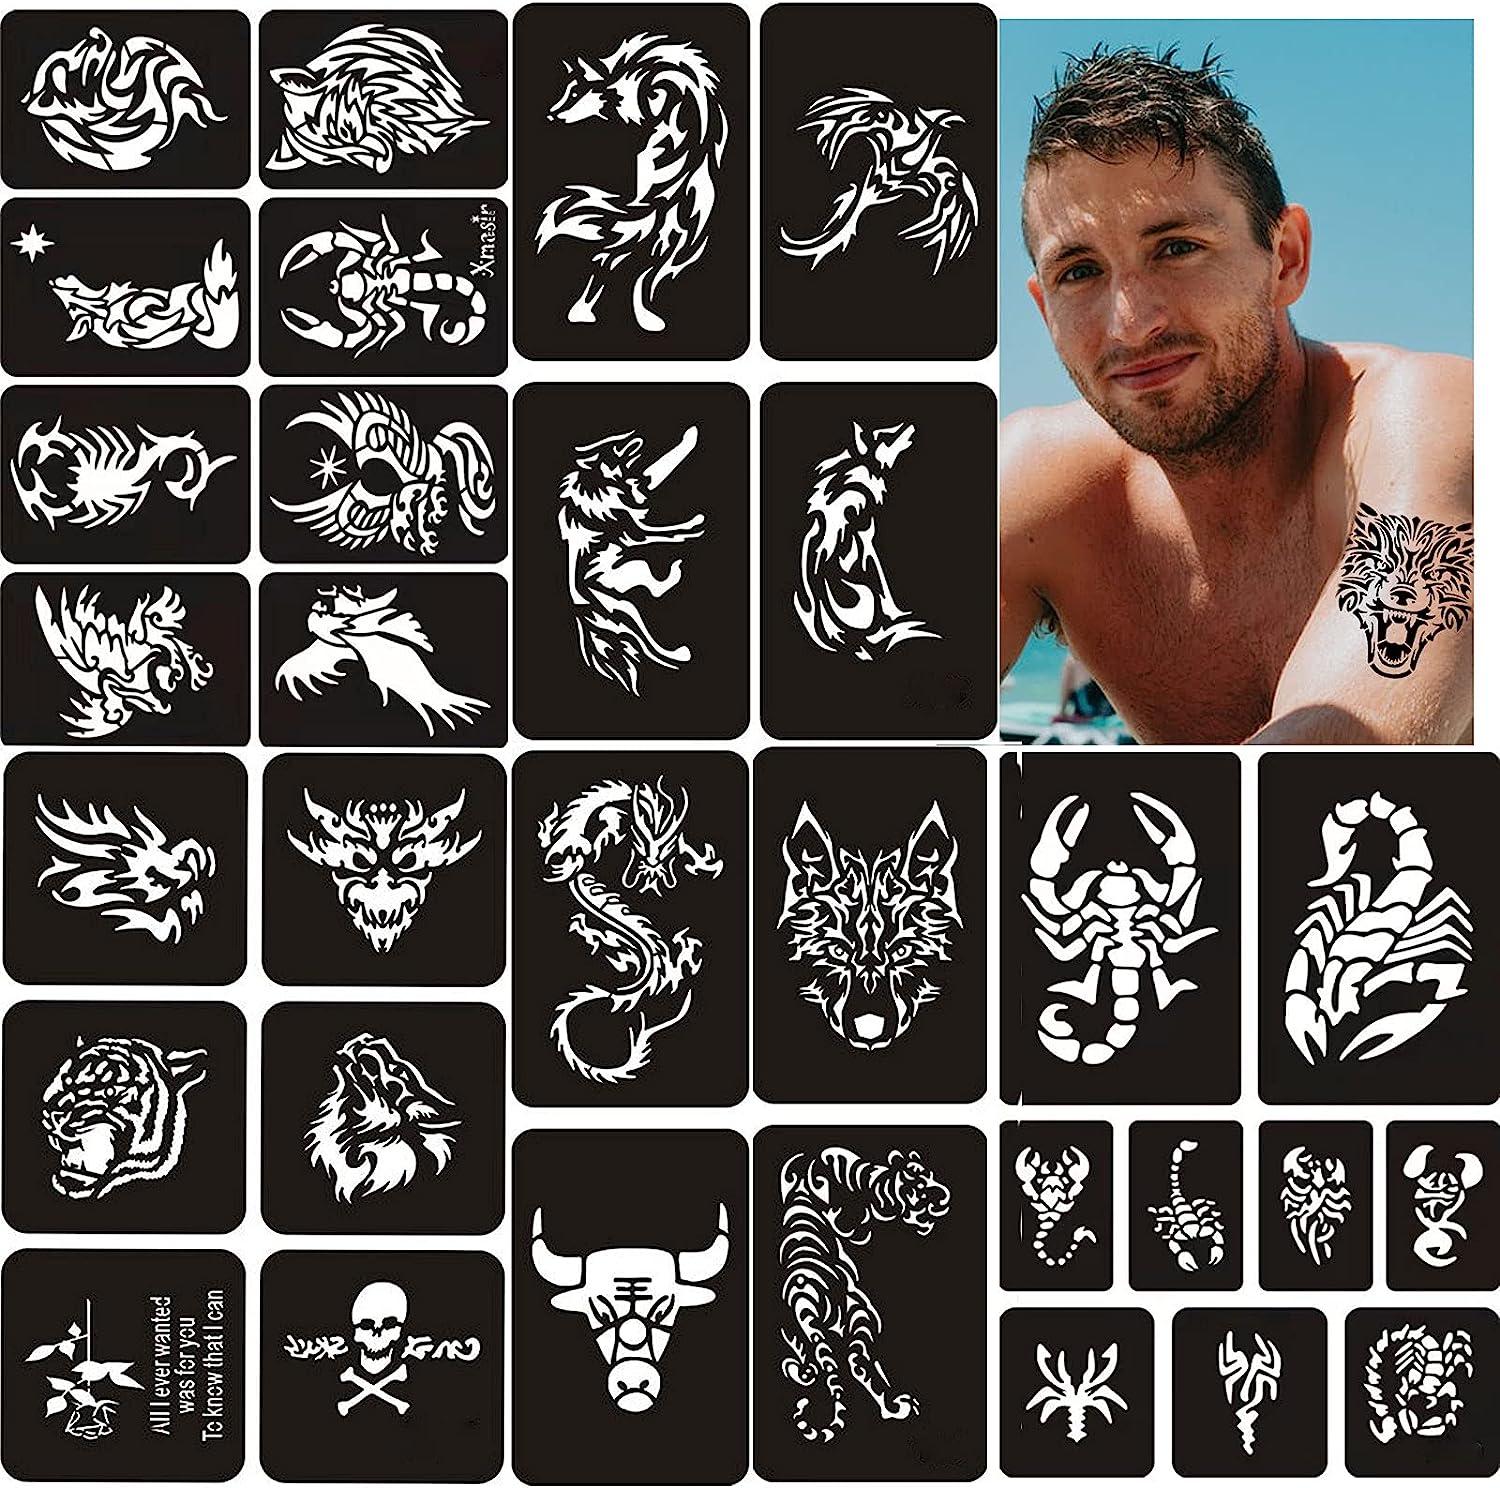 How to make Stencils for Big Tattoo Designs